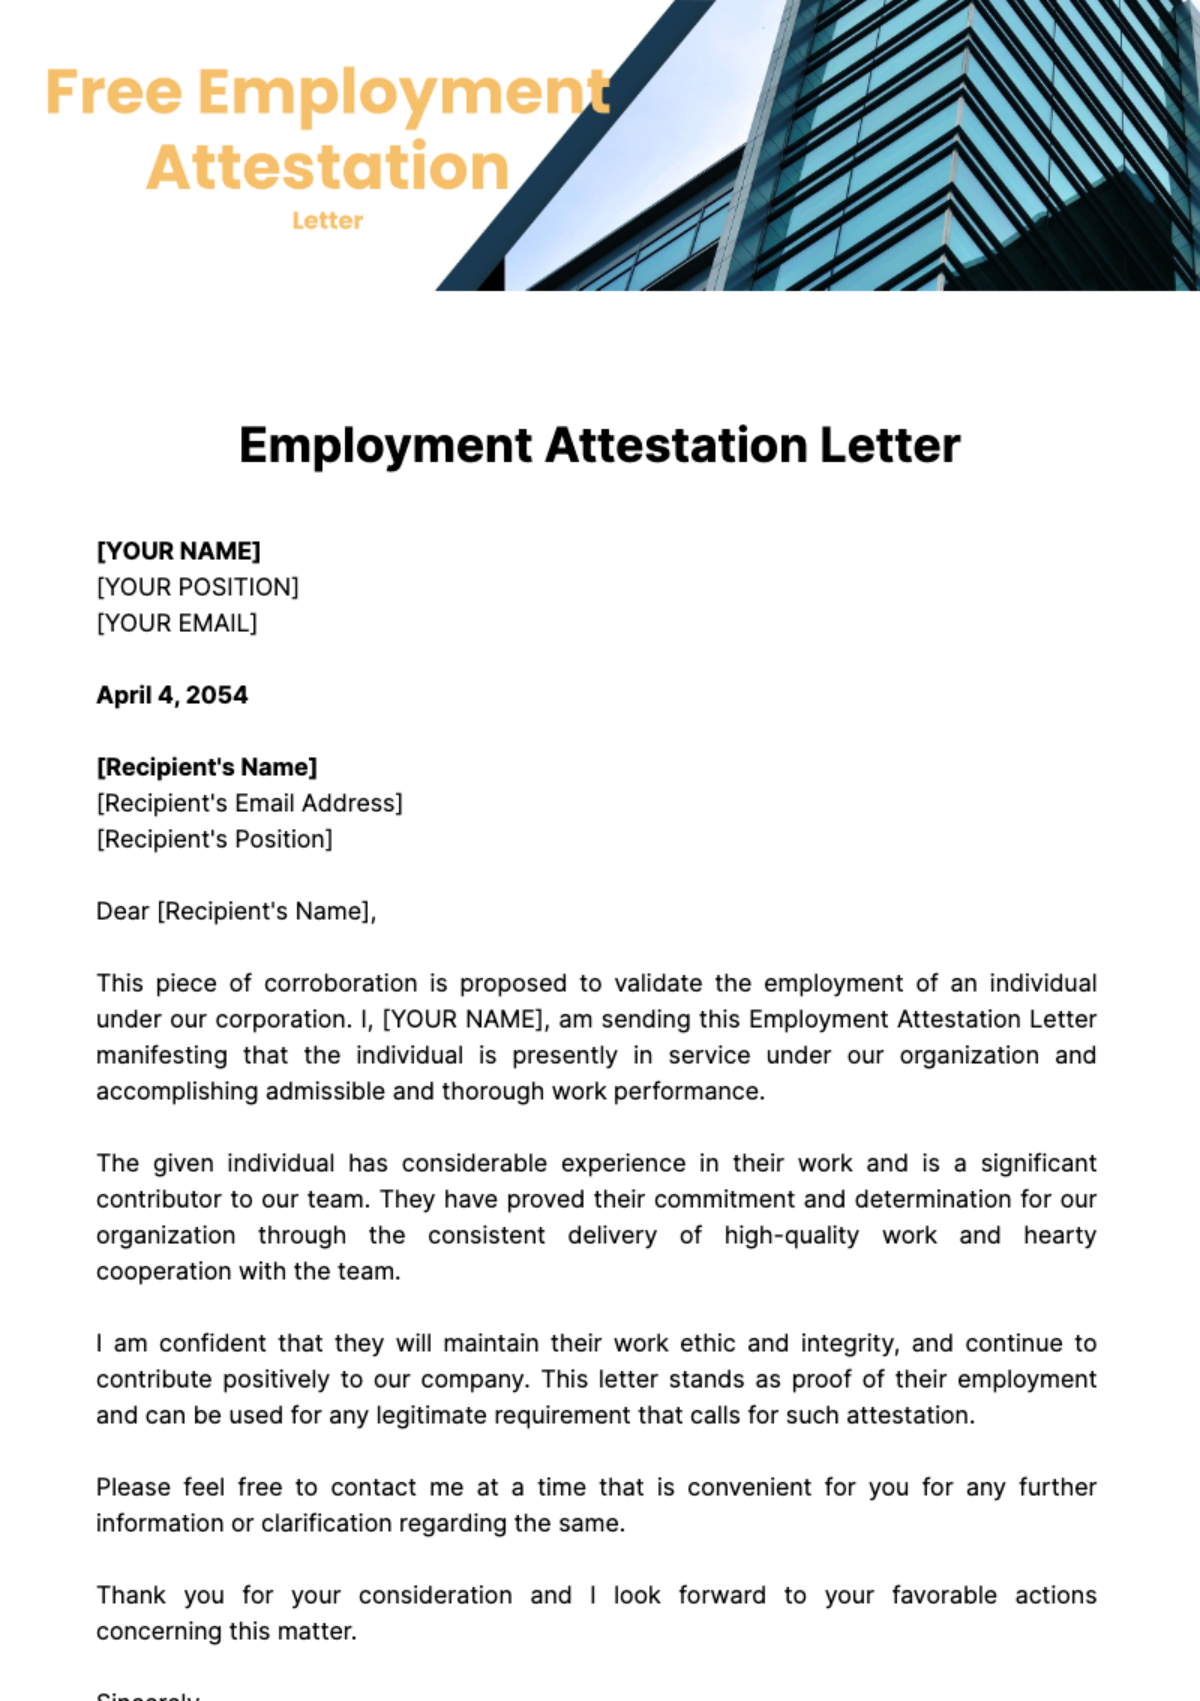 Free Employment Attestation Letter Template